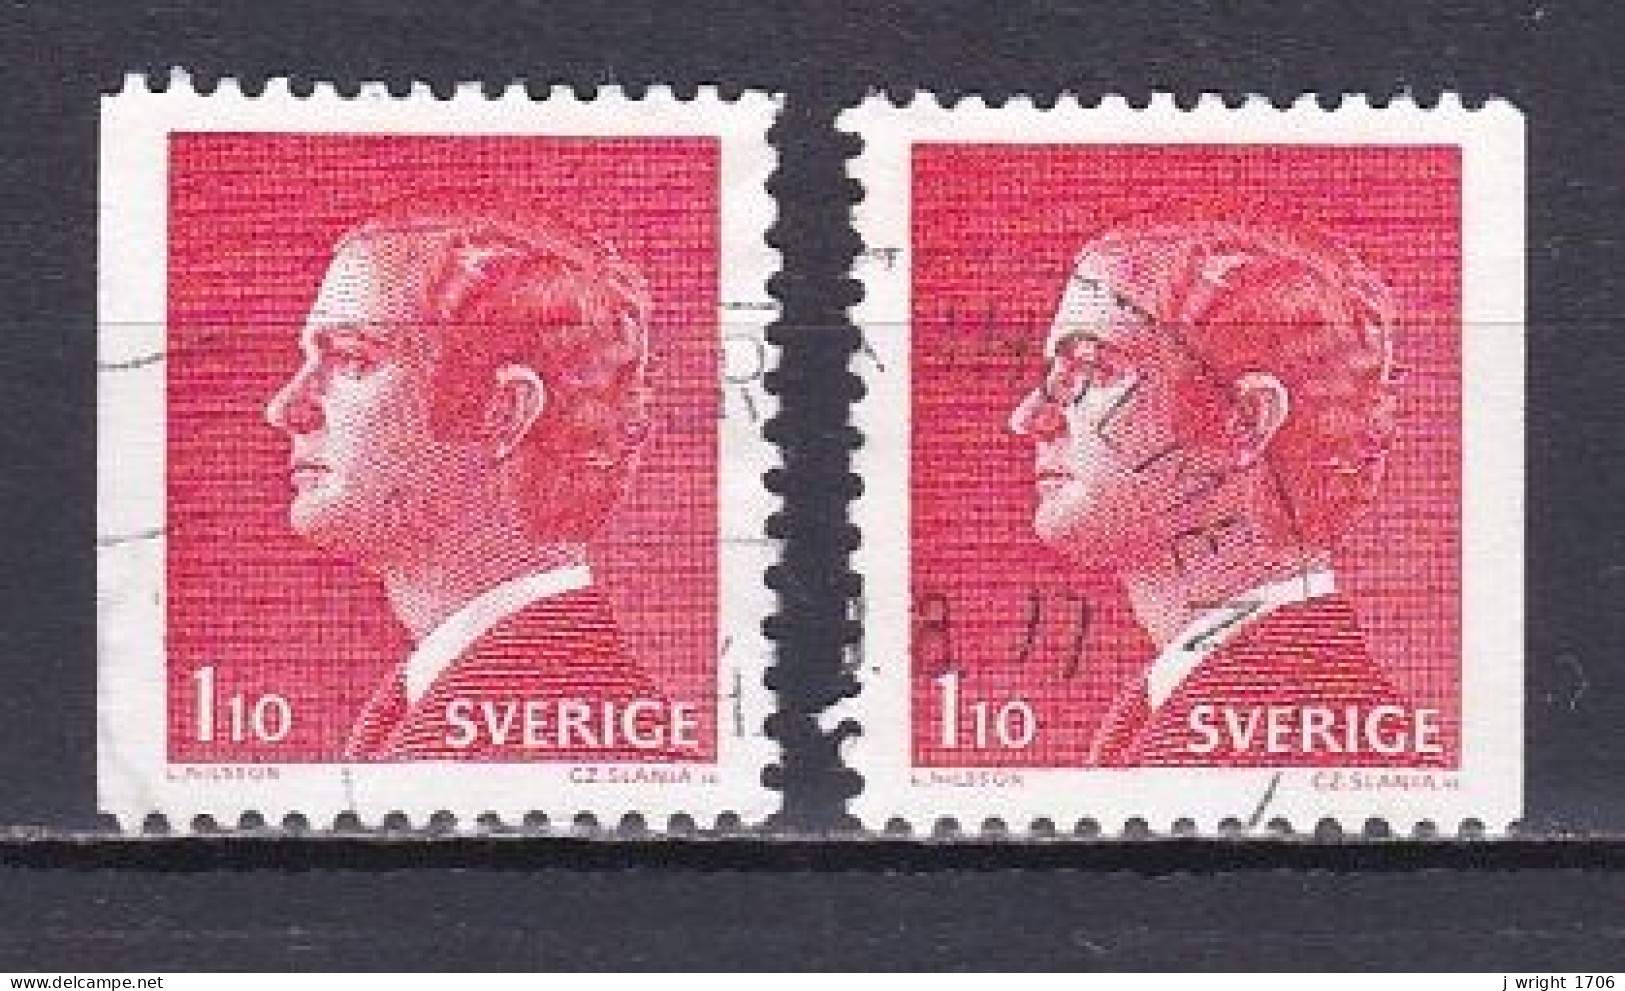 Sweden, 1977, King Carl XVI Gustaf, 1.10kr/2 X Perf 3 Sides, USED - Used Stamps